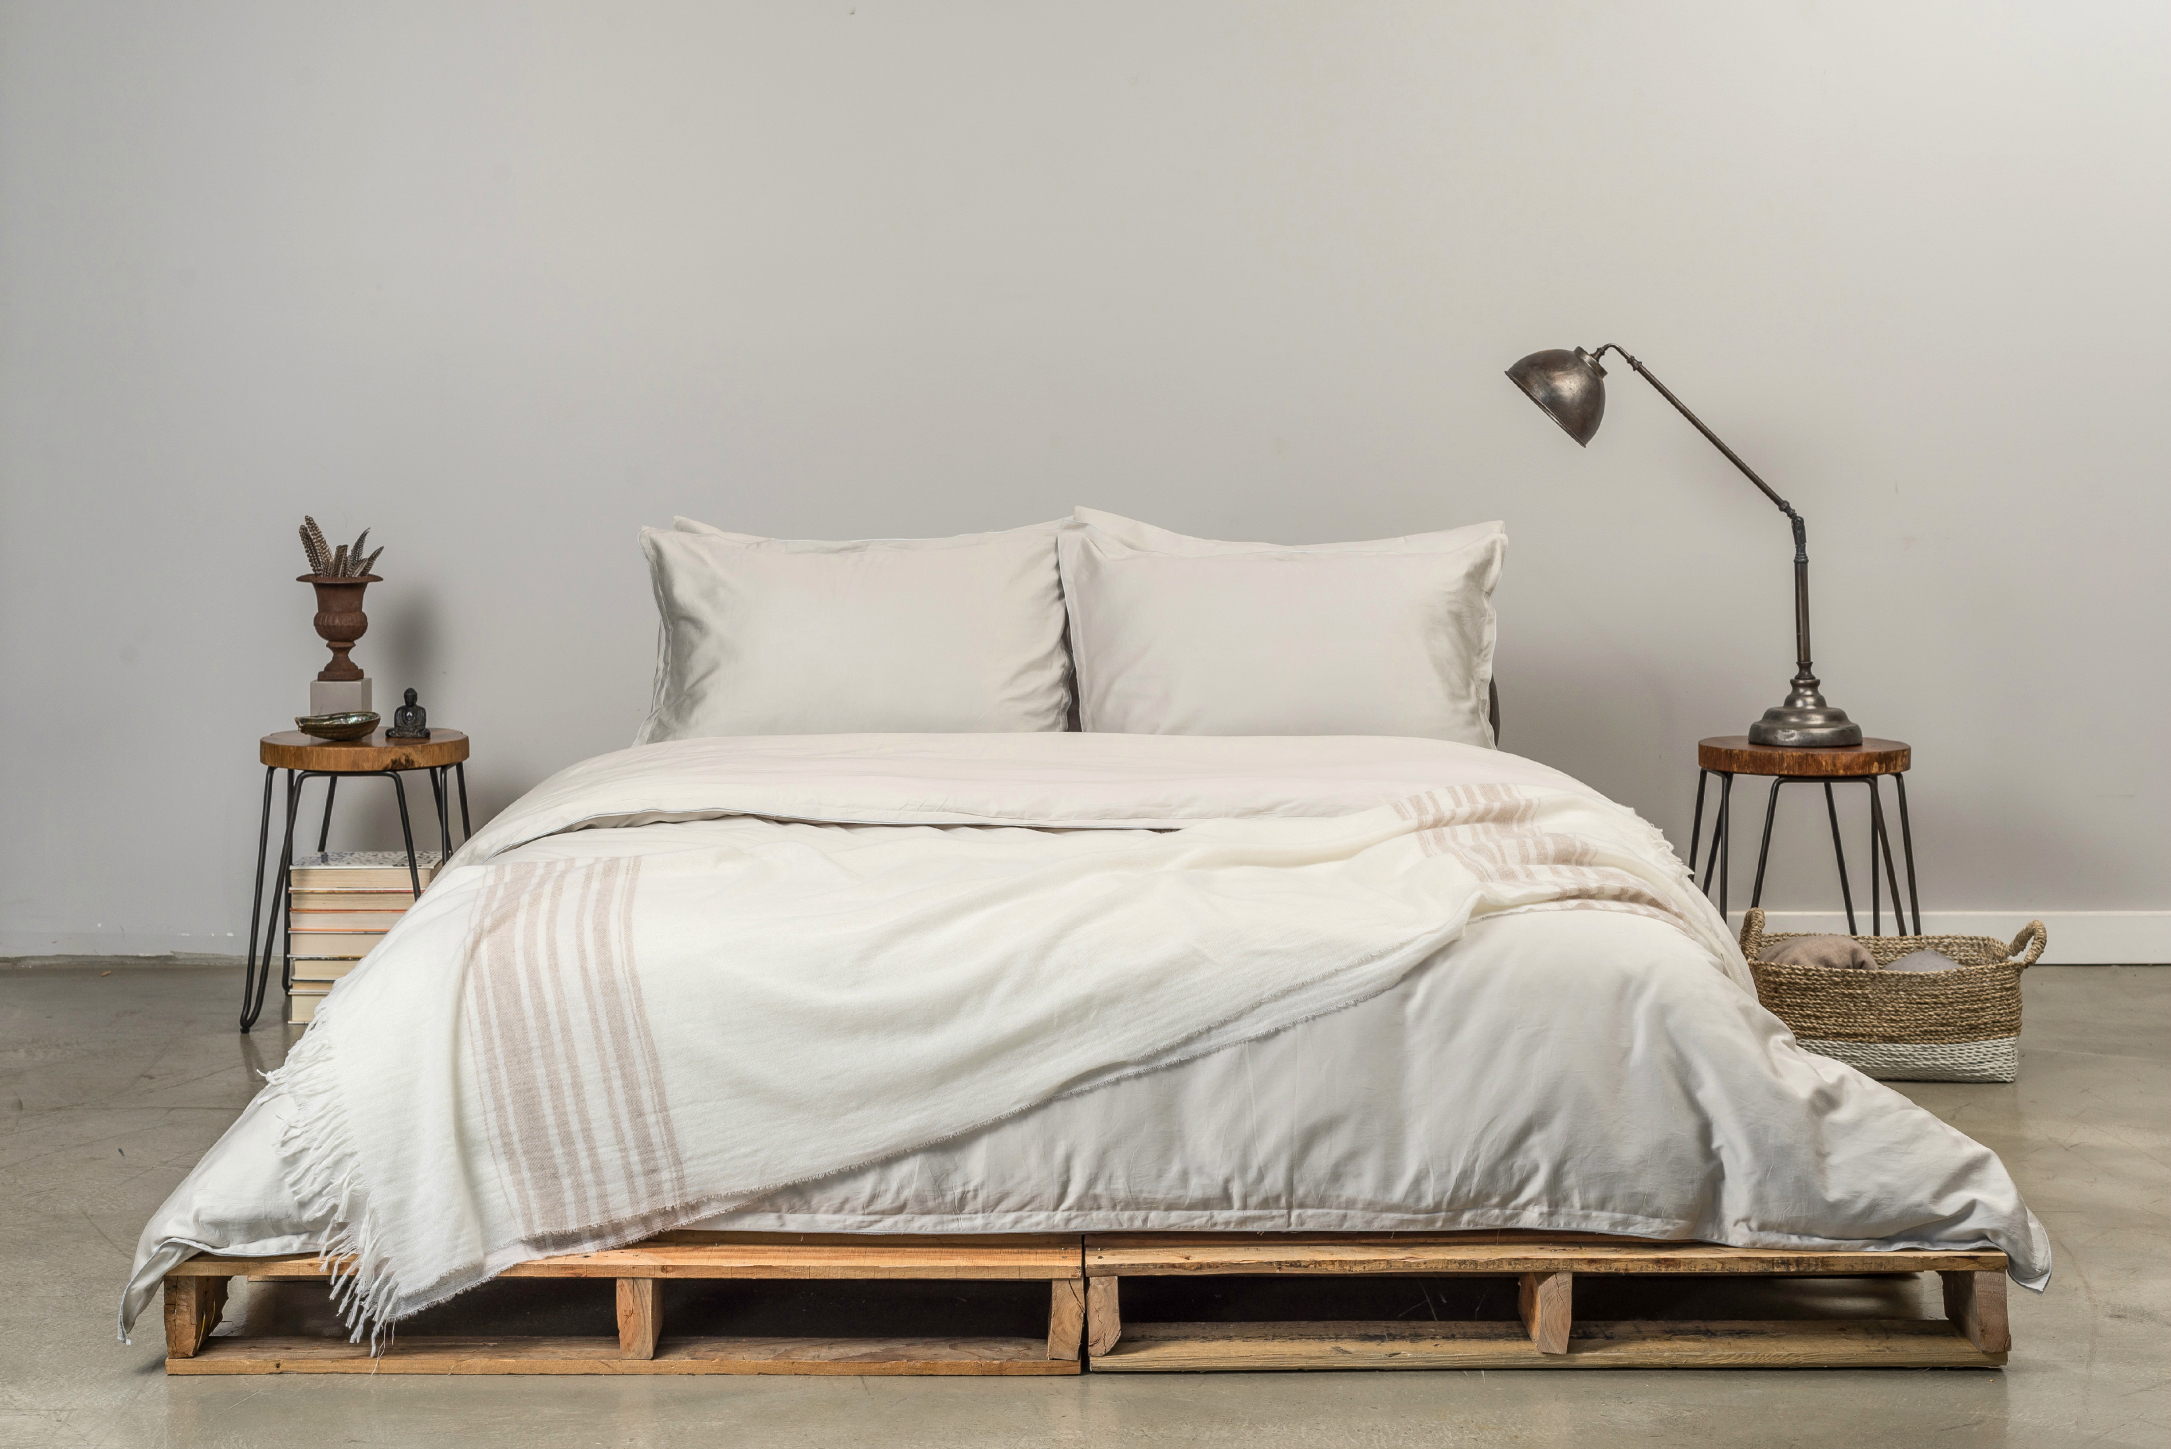 9 truths about bedding: How to use your sheets to get a good night's sleep